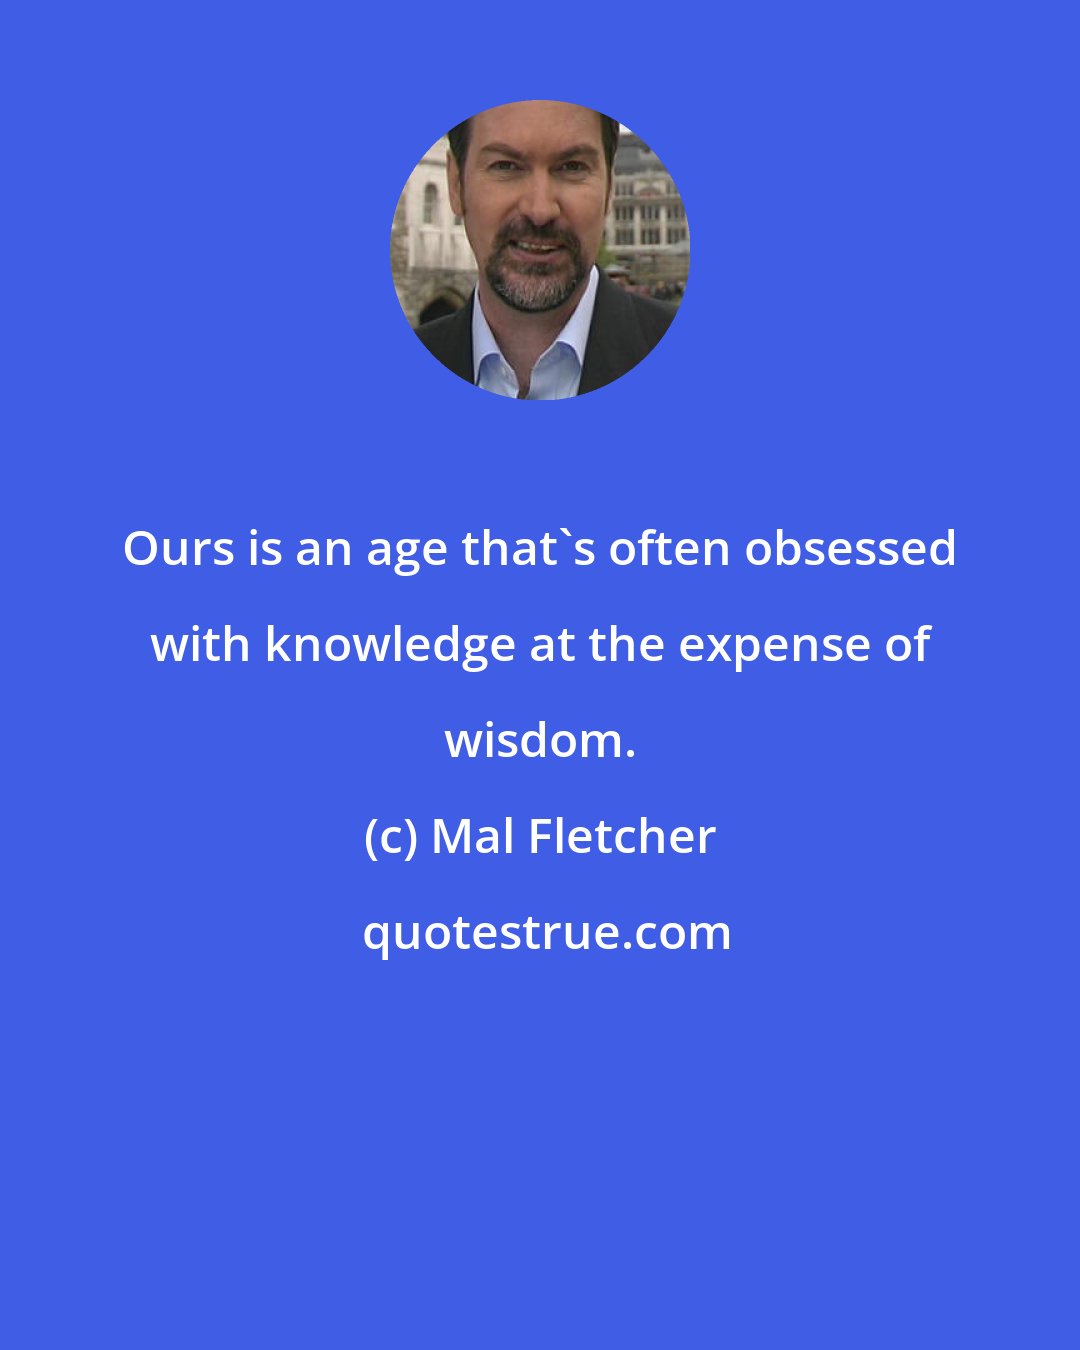 Mal Fletcher: Ours is an age that's often obsessed with knowledge at the expense of wisdom.